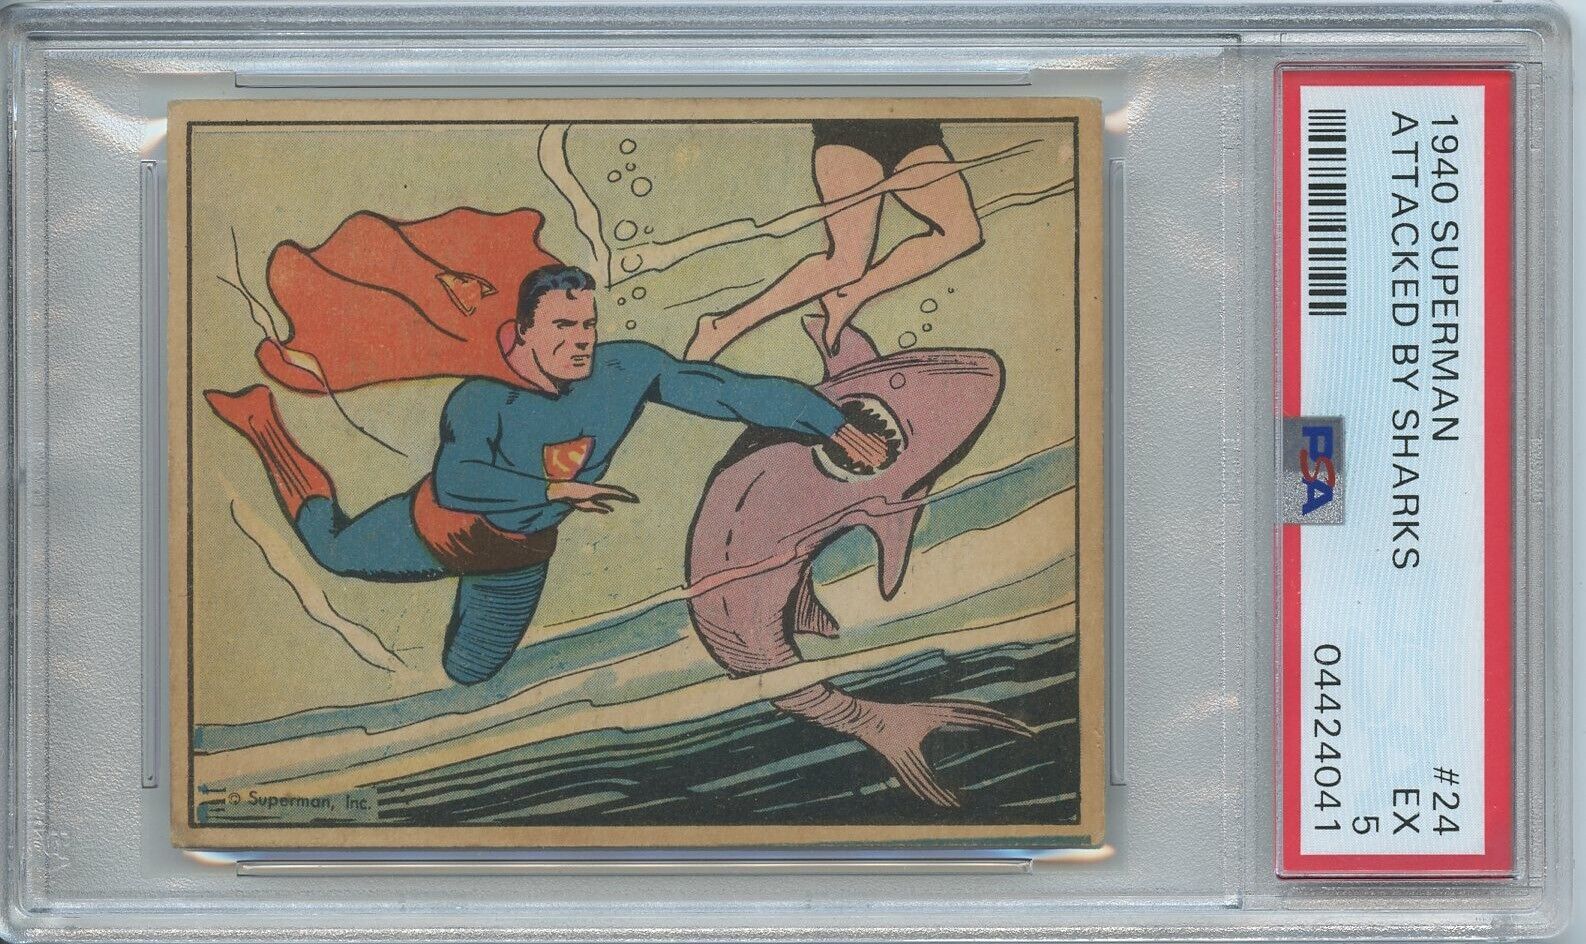 1940 Superman #24 Attacked By Sharks EX PSA 5